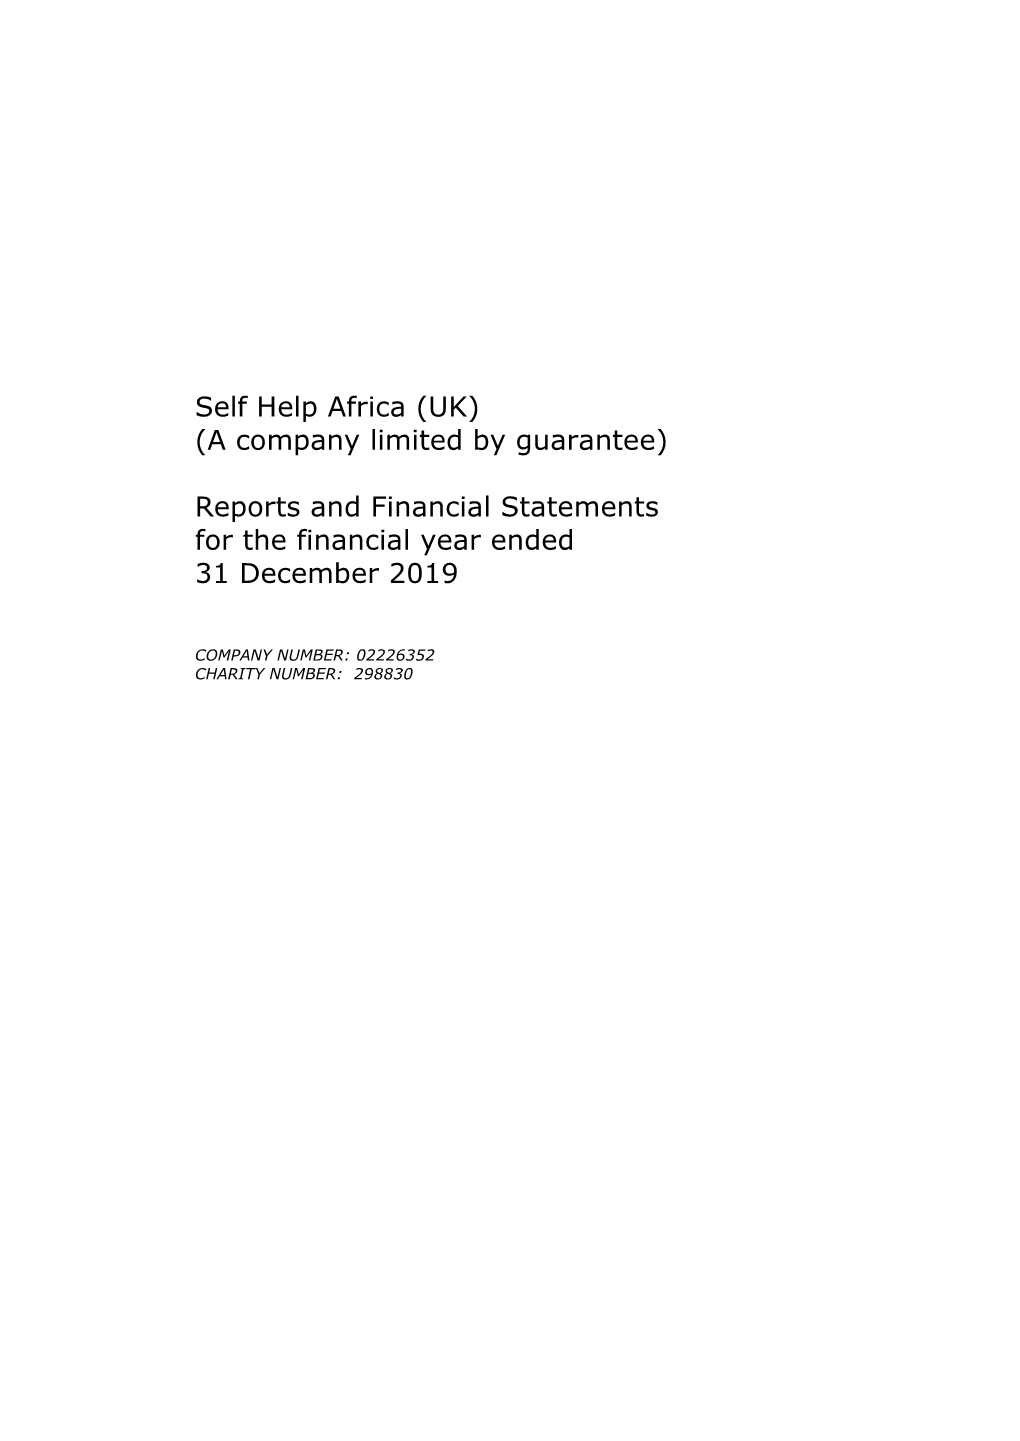 Self Help Africa (UK) (A Company Limited by Guarantee) Reports And